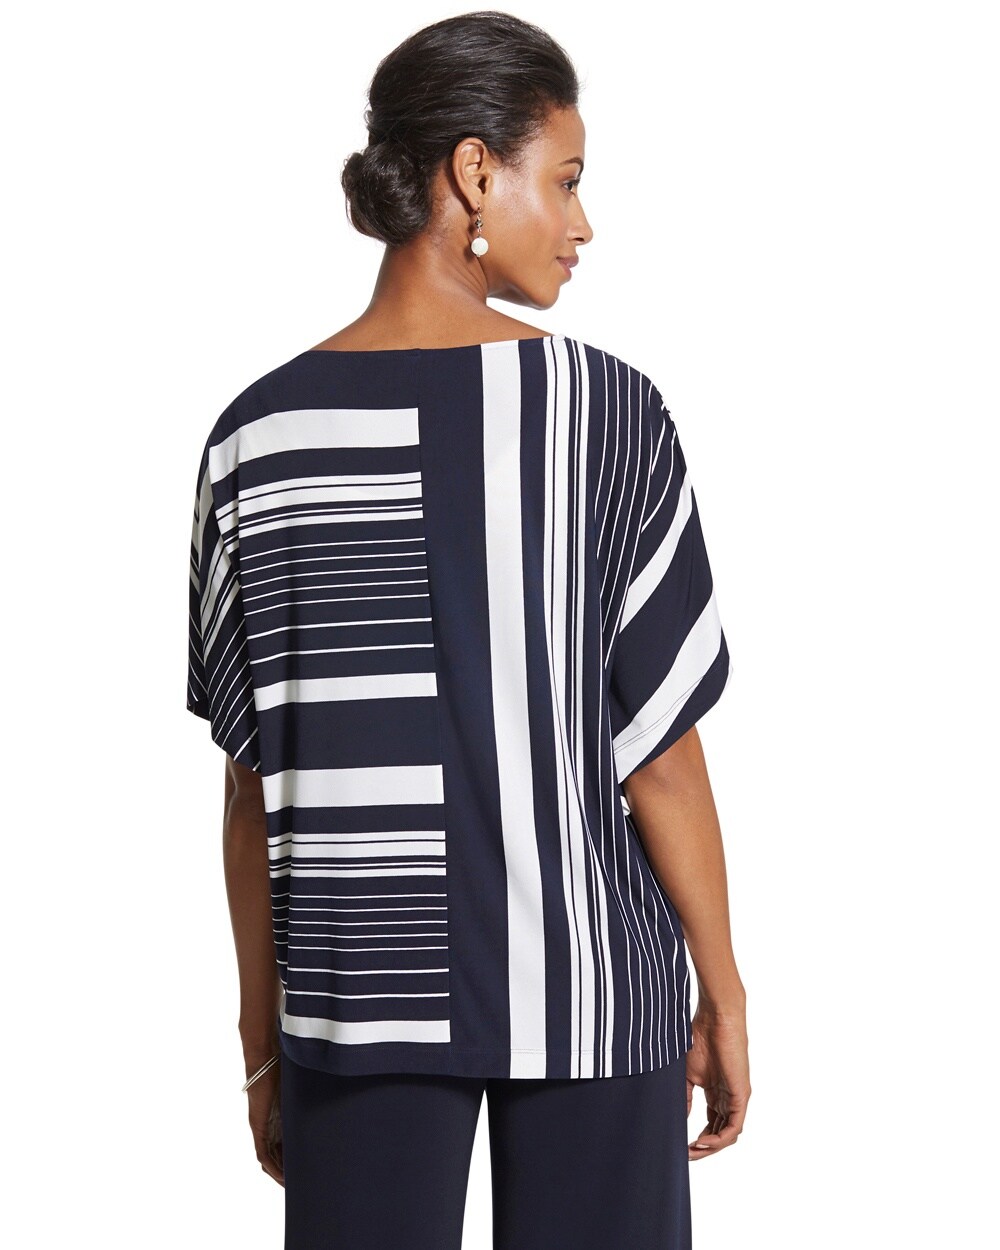 Knit Kit Striped Top - Chicos